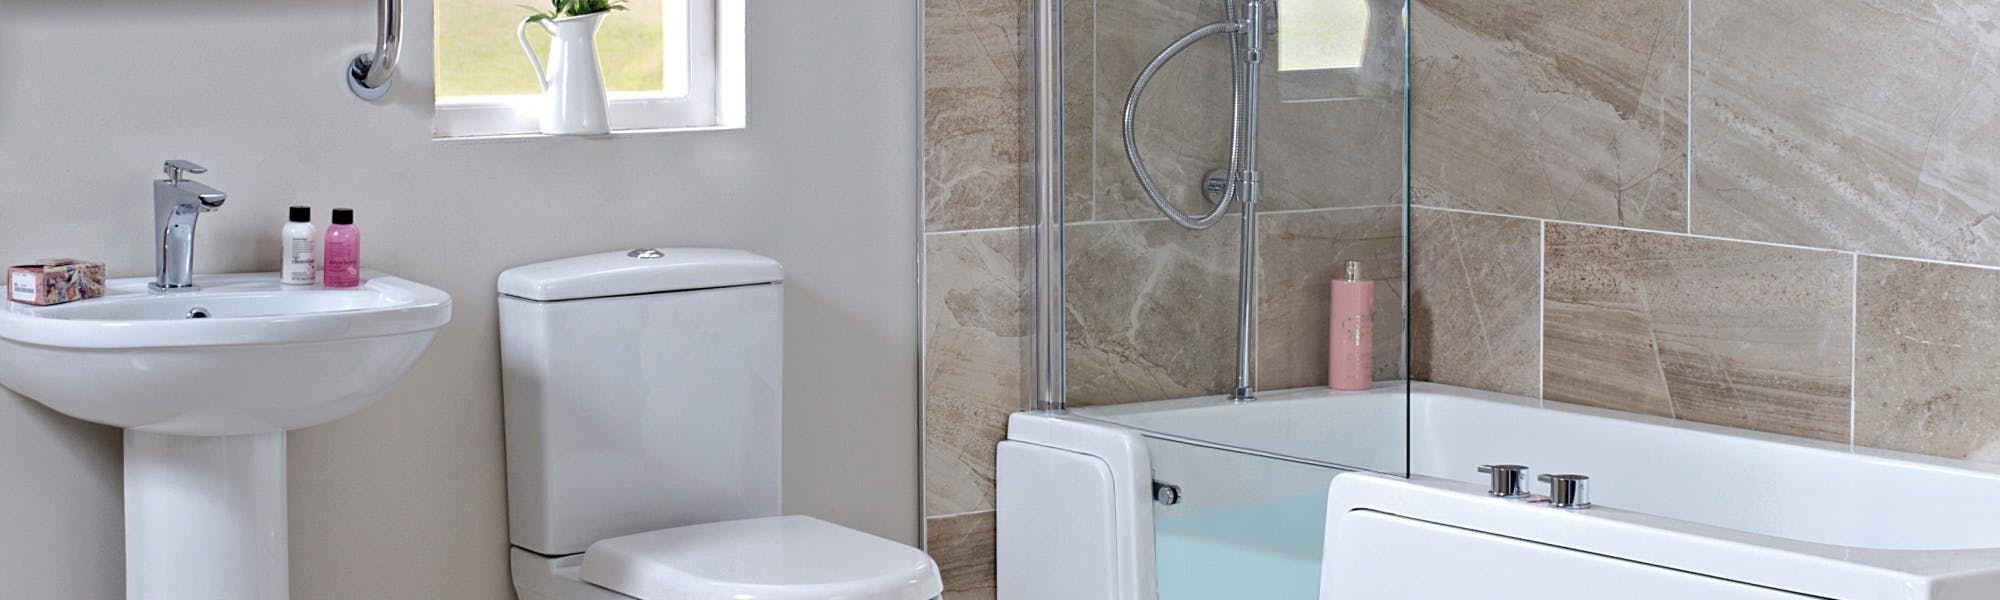 We've been designing & installing walk-in baths for over 50 years, and within that time helped hundreds of elderly & less-abled people remain safe & independent within their own home.